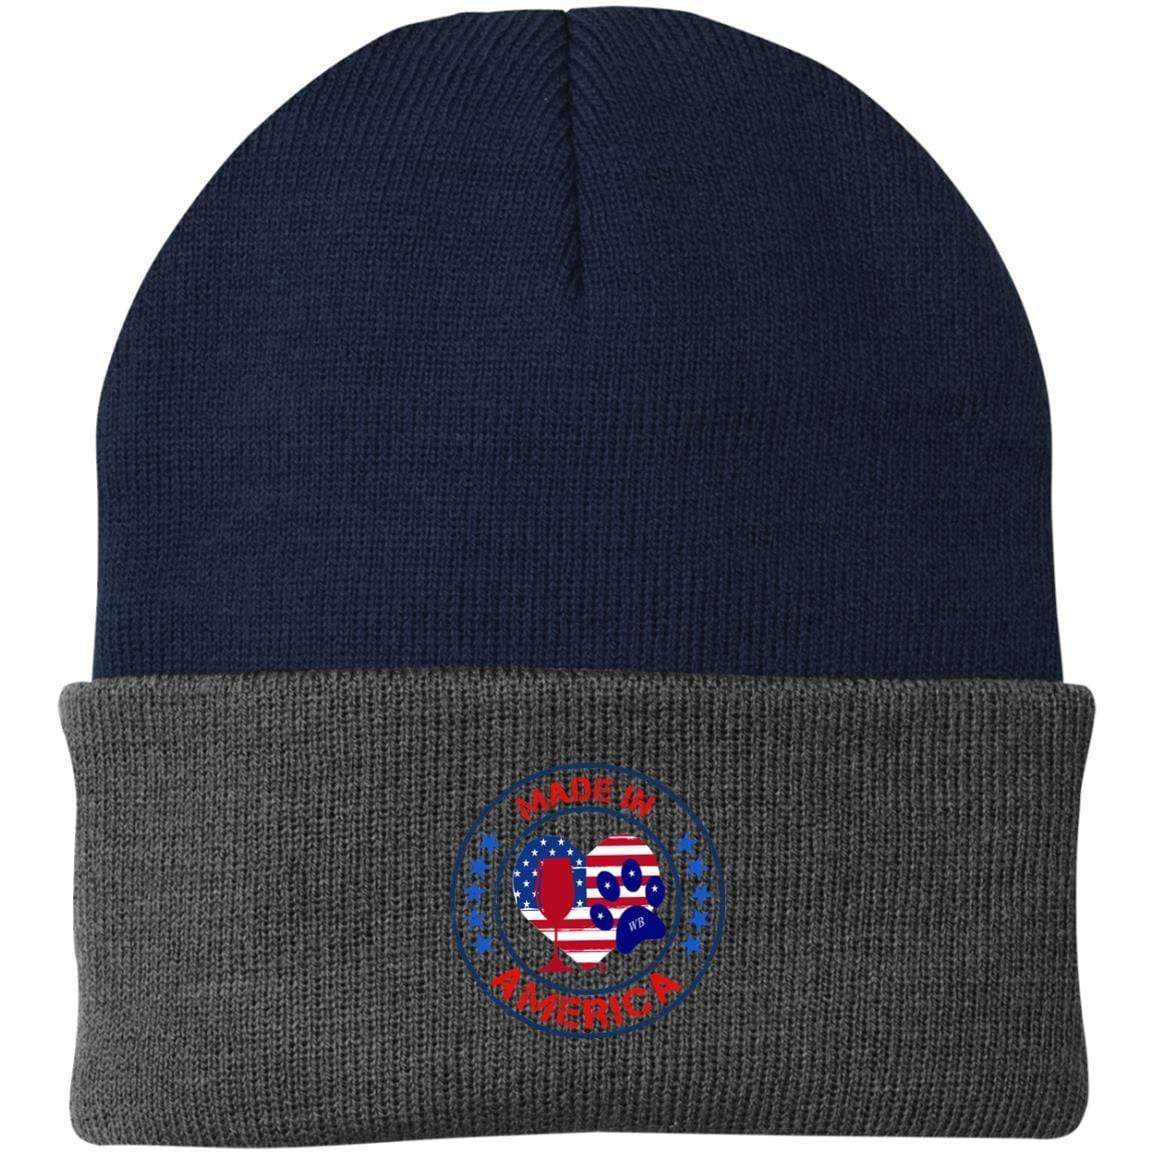 Hats Navy/Athletic Oxford / One Size Winey Bitches Co "Made In America" Embroidered Knit Cap WineyBitchesCo